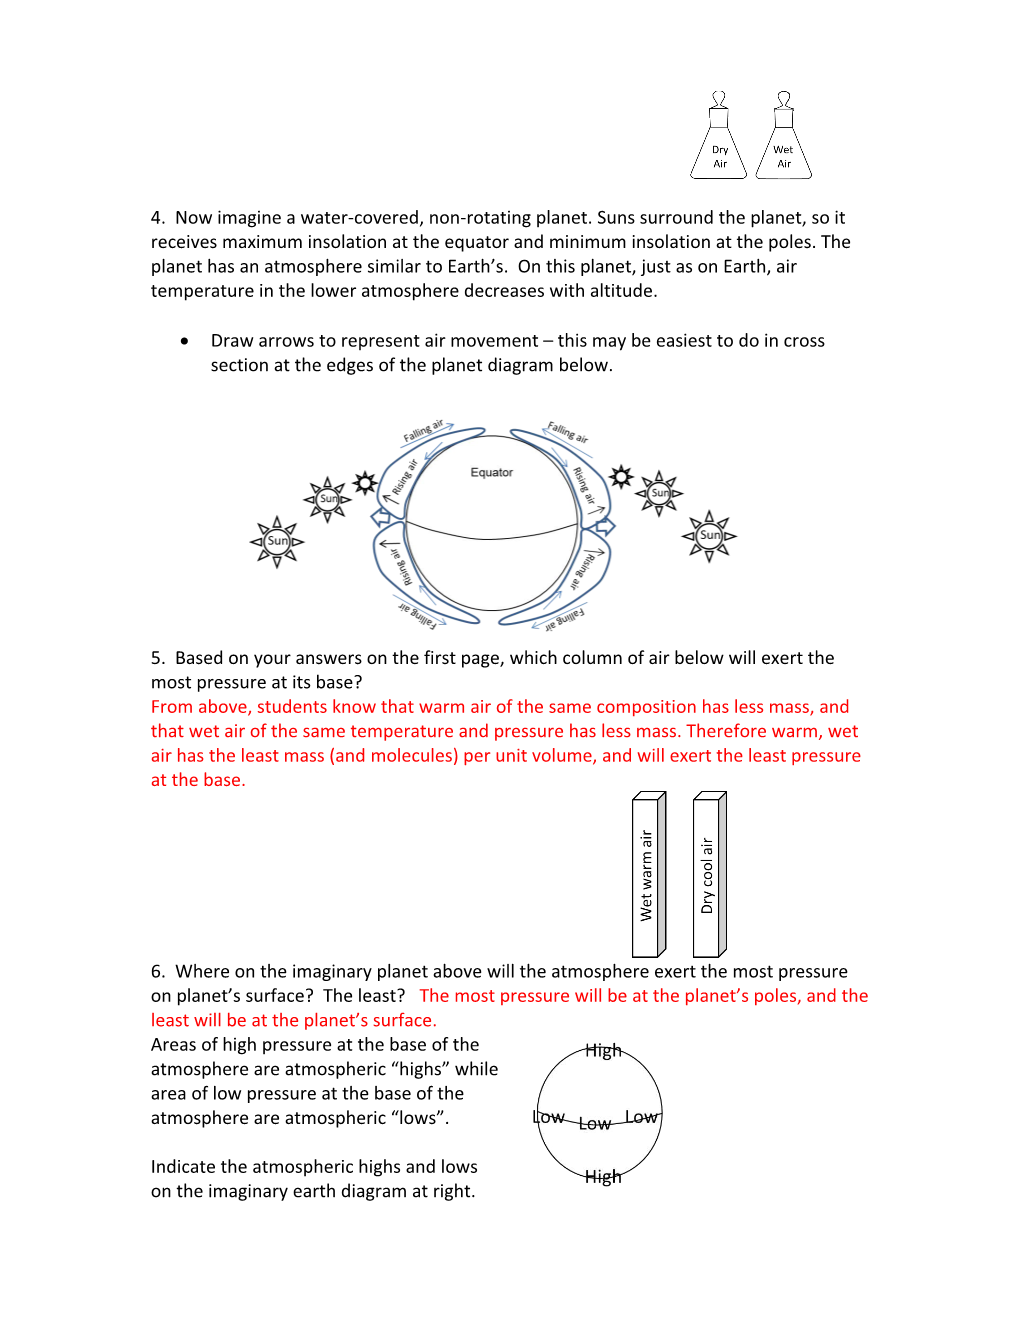 Atmospheric Circulation: Concepts and Patterns ANSWER KEY